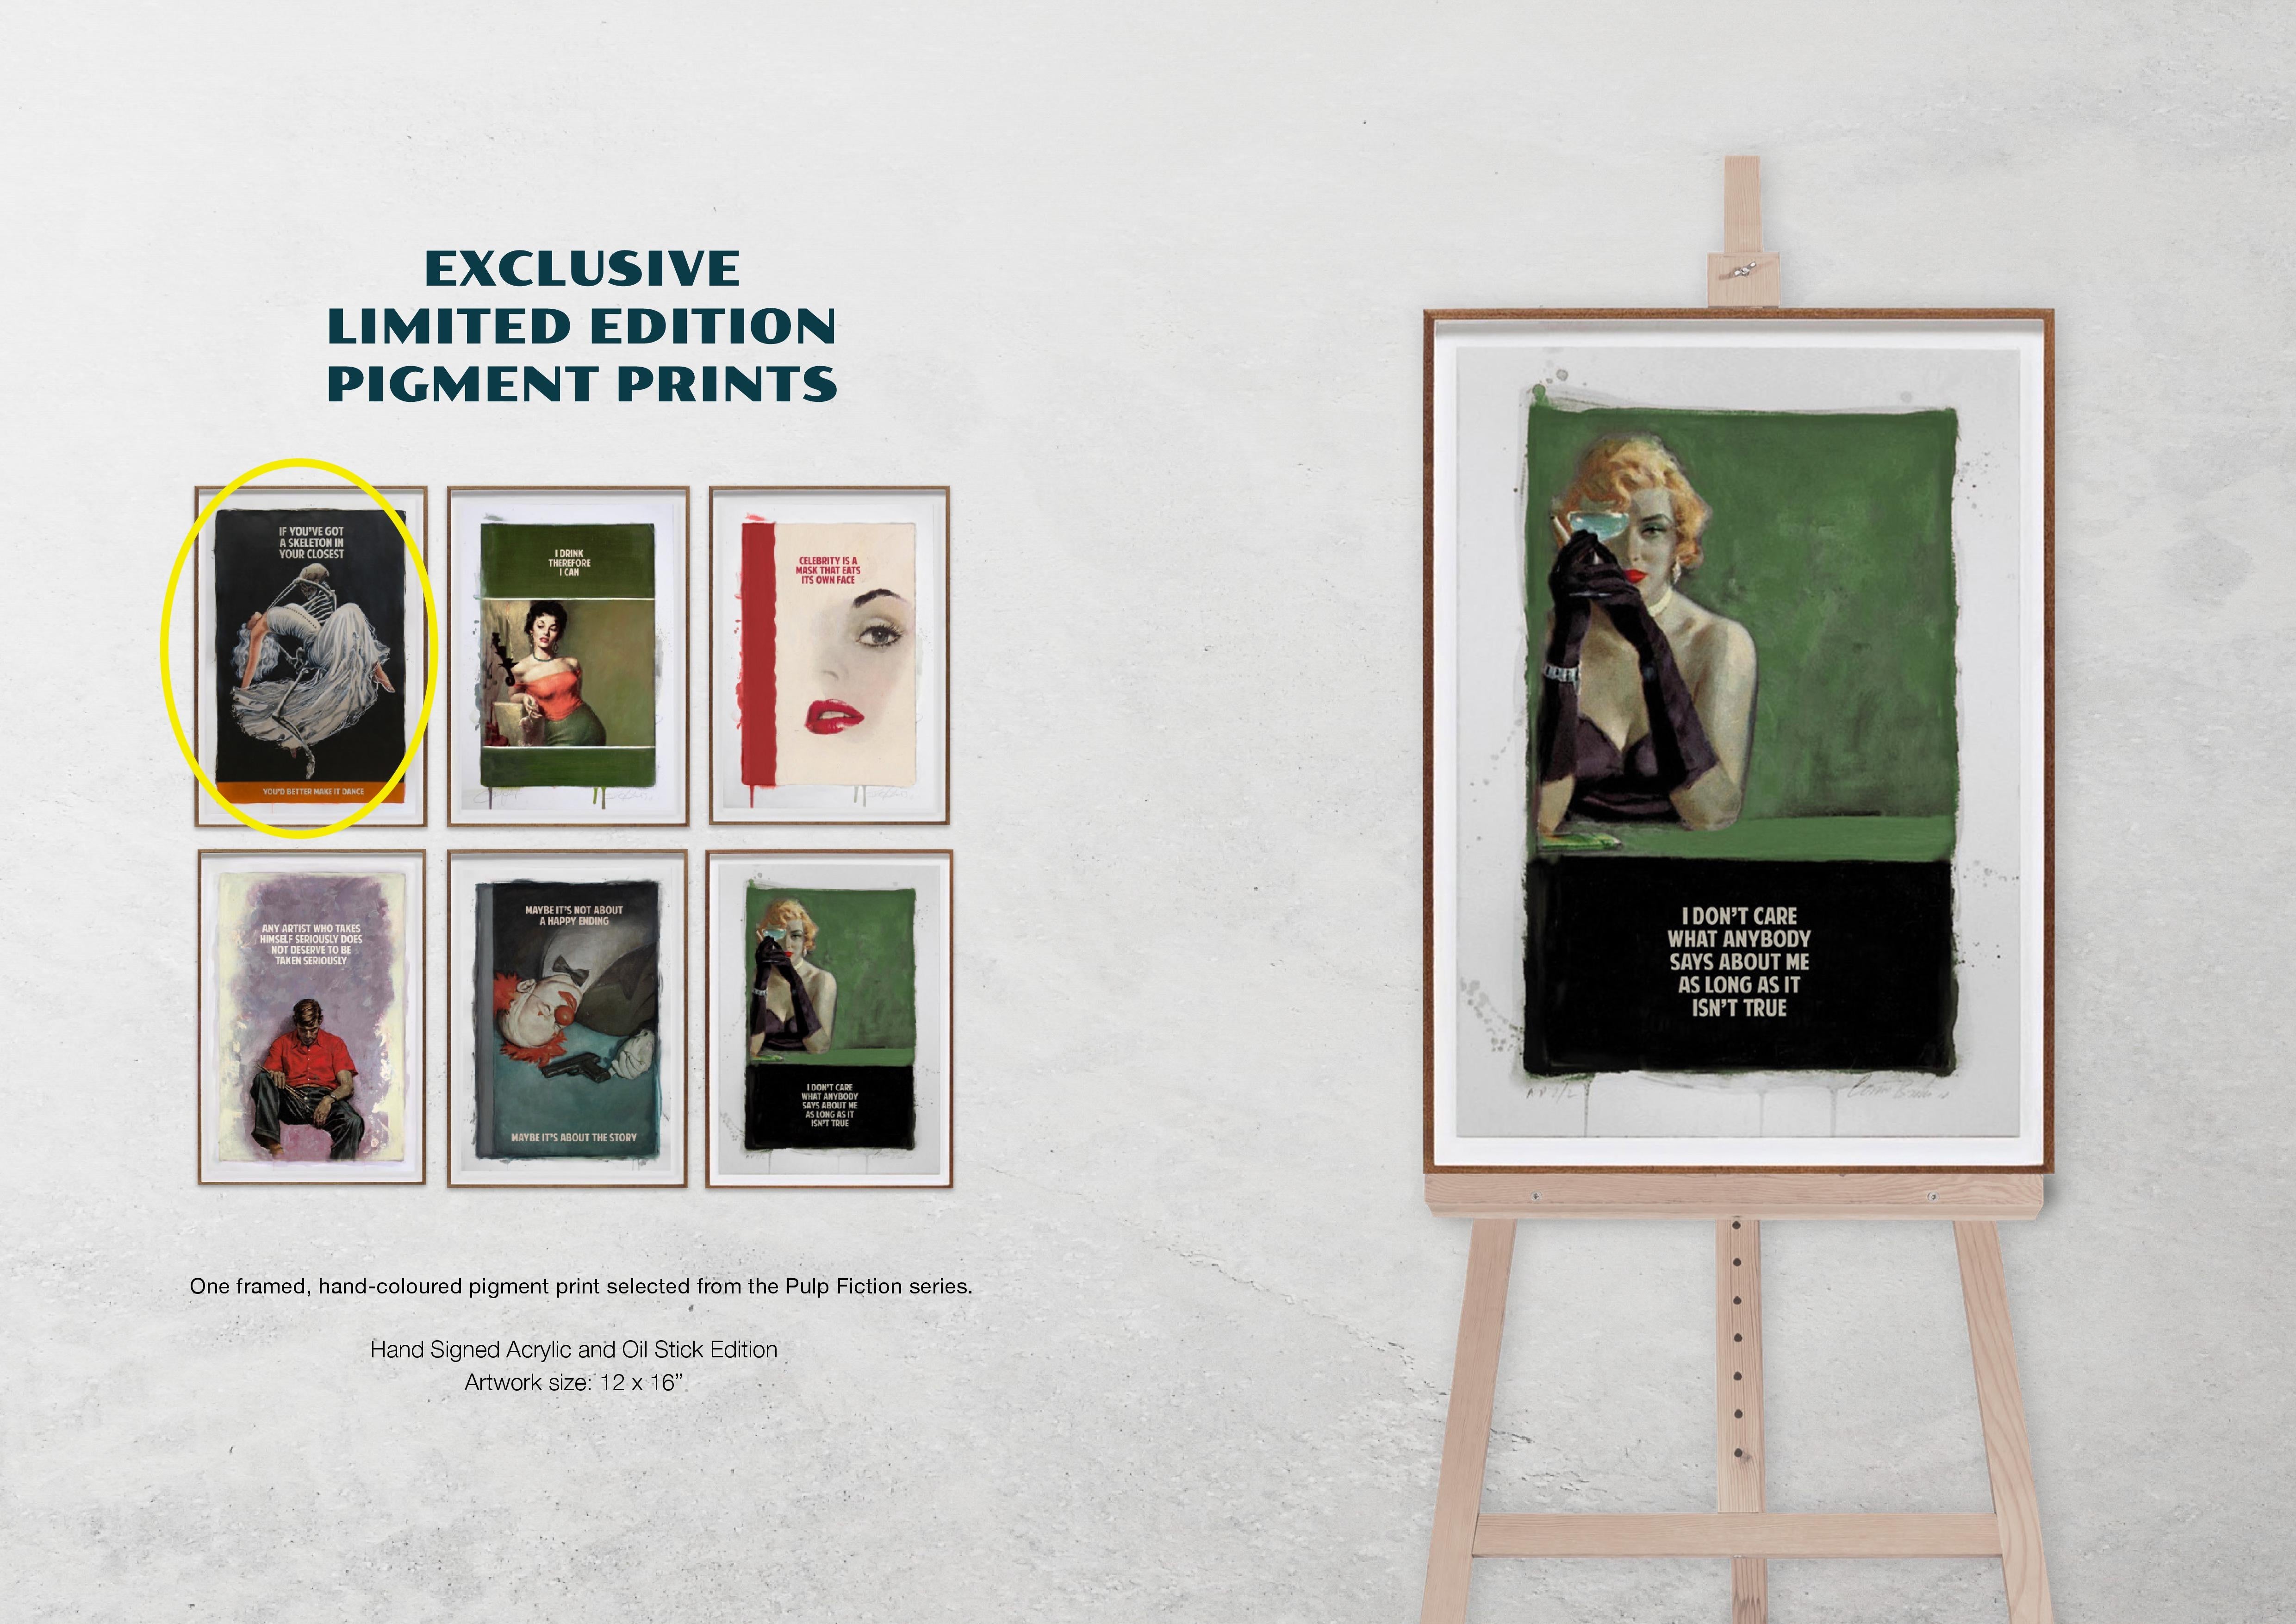 A LOAD OF FUSS..., 2021
Limited edition Box set to celebrate 10 years of The Connor Brothers

Edition of 120
Box Set Size: 34 x 22” (84 x 56cm)

The Presentation Box includes

10 x hand signed silk screen varnish editions (33 x 22 inches)
1 x hand